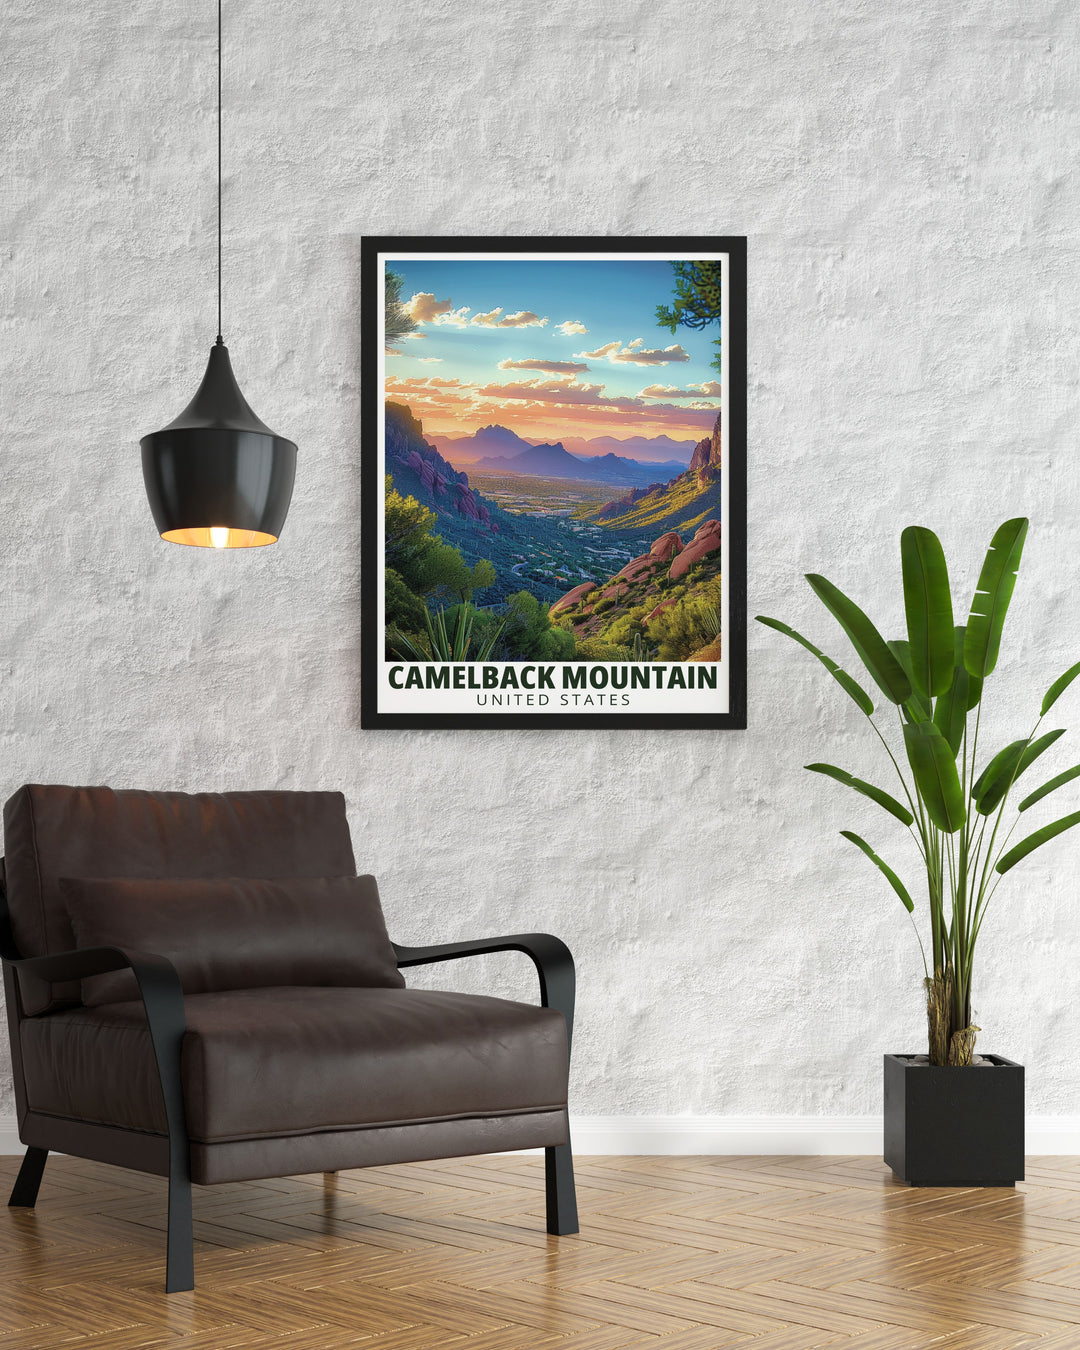 Capture the essence of Arizona with this stunning Echo Canyon Trail vintage print. Ideal for home decor or as a gift this Arizona travel art piece showcases the breathtaking views of Mt. Camelback and the unique beauty of Echo Canyon Trail.